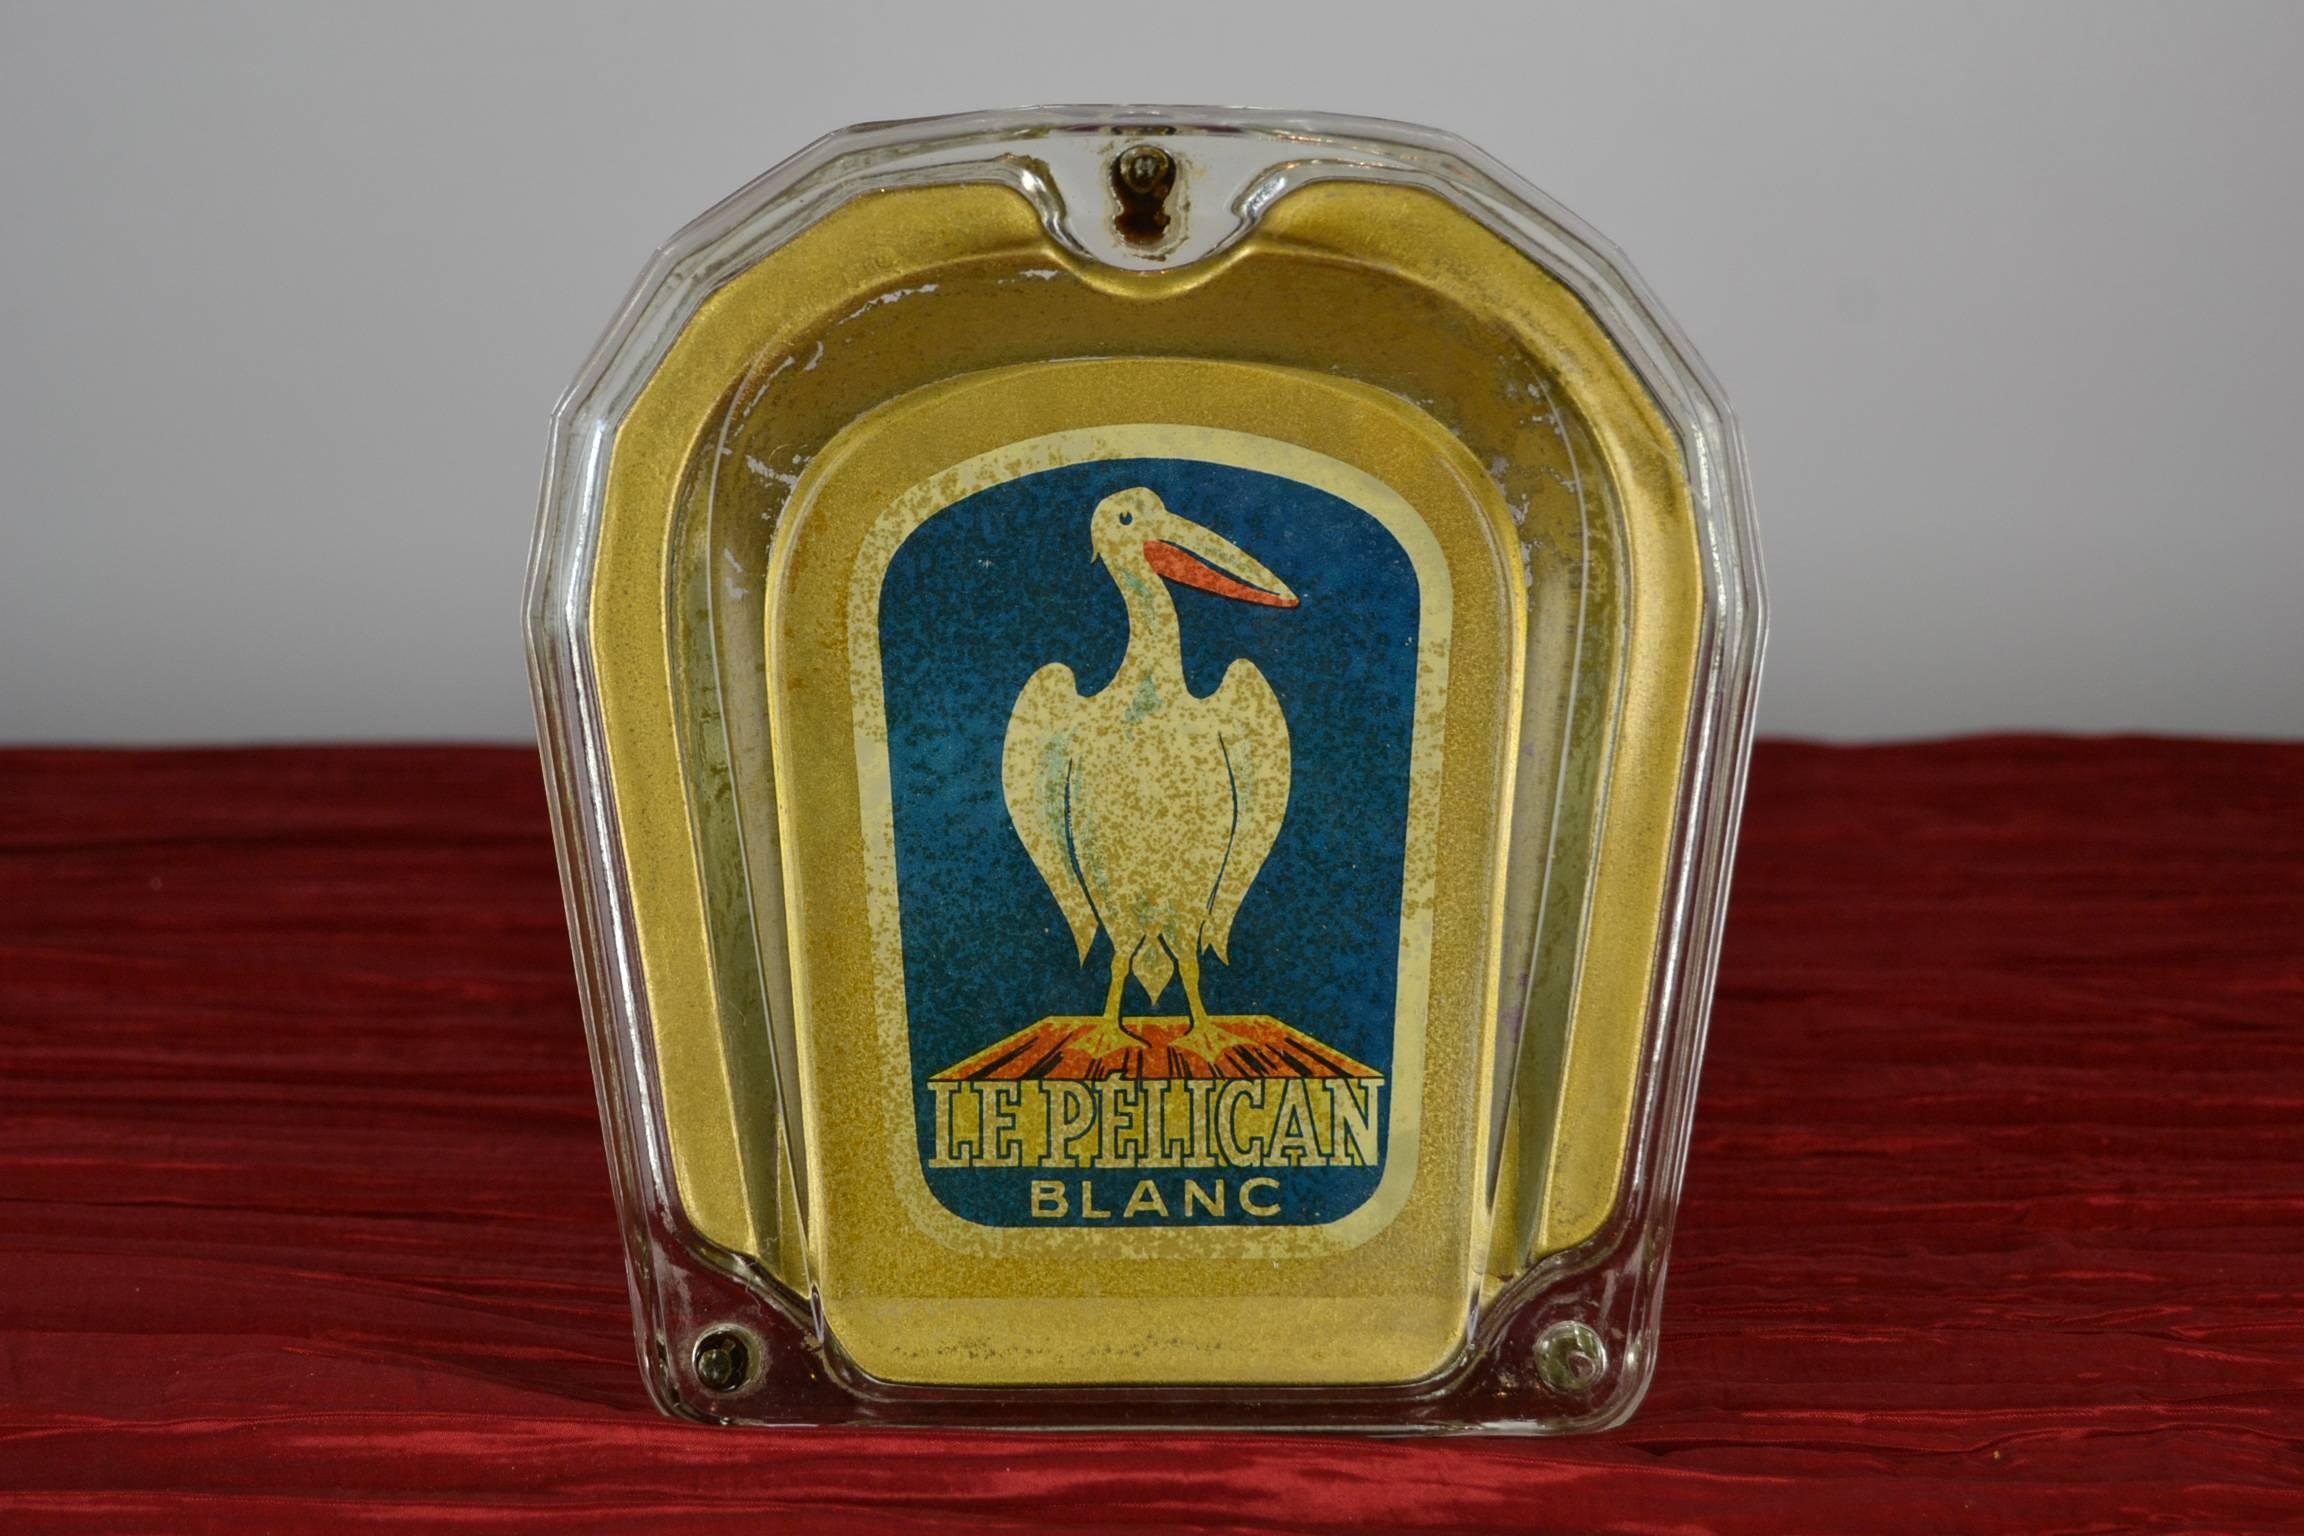 Vintage Money Valve  - Ramasse-Monnaie for The White Pelican. 
Vintage Counter Display - Advertising Display. 
The White Pelican is known for the high quality of Fountain Pens , Ballpoints and Ink. 
This heavy and stabile glass Money Valve was used